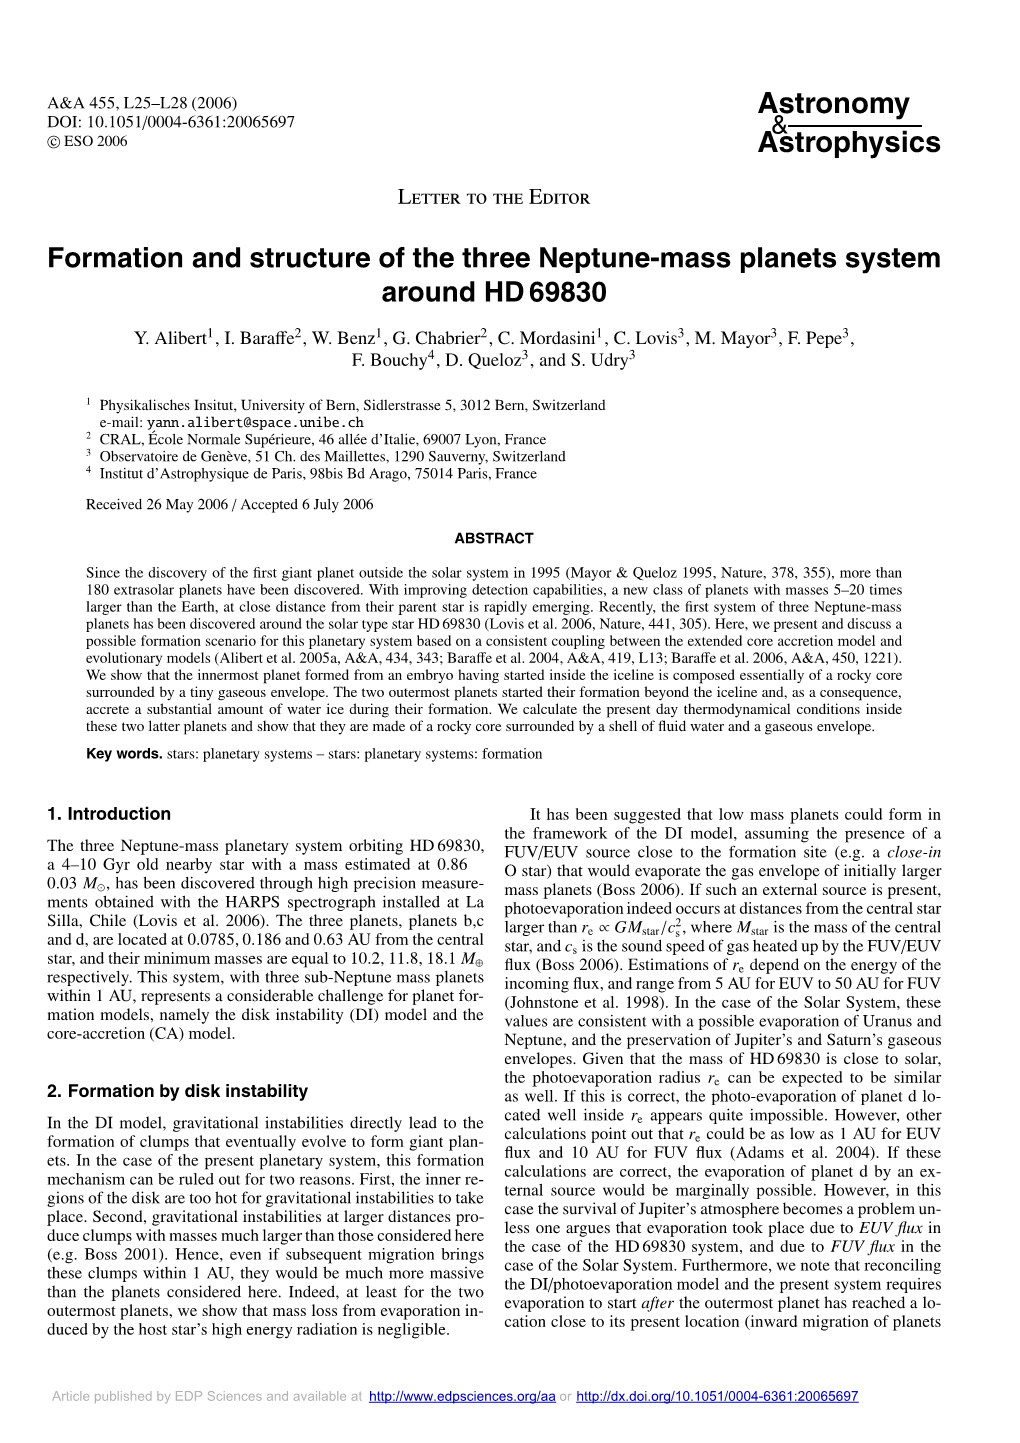 Formation and Structure of the Three Neptune-Mass Planets System Around HD 69830